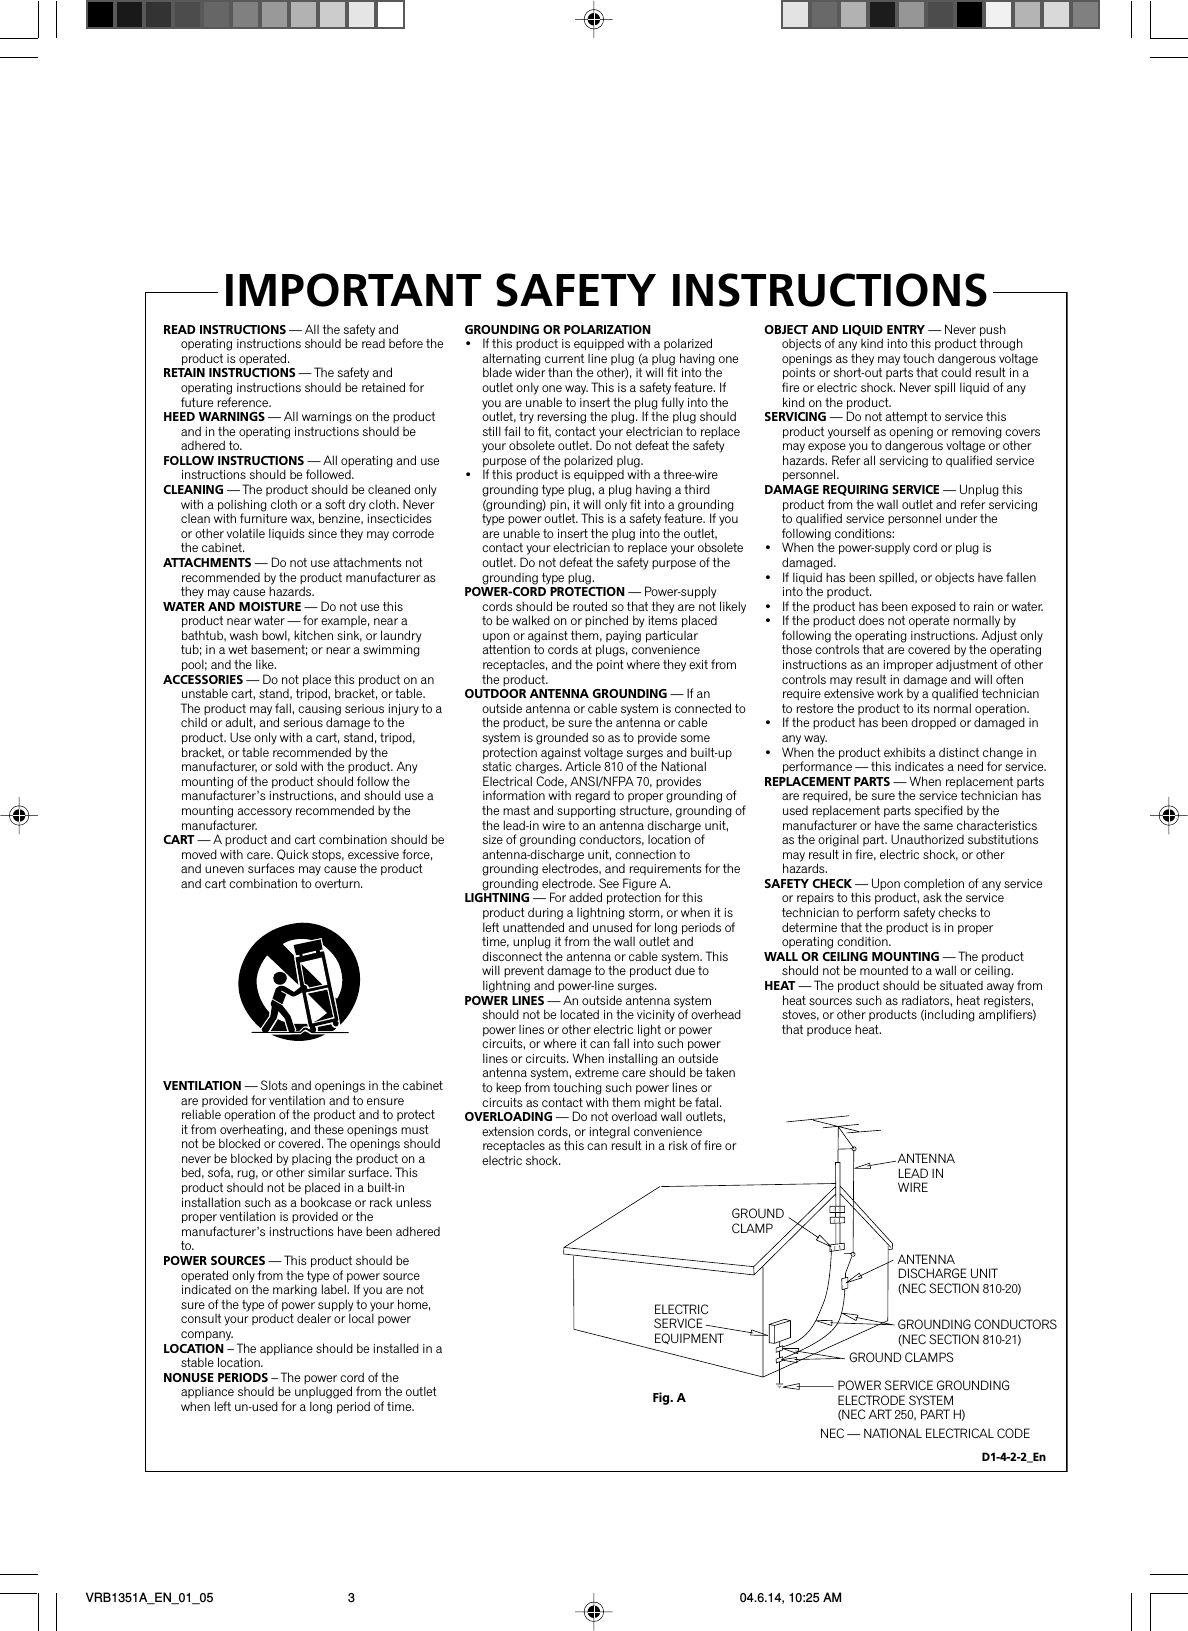 READ INSTRUCTIONS — All the safety and operating instructions should be read before the product is operated.RETAIN INSTRUCTIONS — The safety and operating instructions should be retained for future reference.HEED WARNINGS — All warnings on the product and in the operating instructions should be adhered to.FOLLOW INSTRUCTIONS — All operating and use instructions should be followed.CLEANING — The product should be cleaned only with a polishing cloth or a soft dry cloth. Never clean with furniture wax, benzine, insecticides or other volatile liquids since they may corrode the cabinet.ATTACHMENTS — Do not use attachments not recommended by the product manufacturer as they may cause hazards.WATER AND MOISTURE — Do not use this product near water — for example, near a bathtub, wash bowl, kitchen sink, or laundry tub; in a wet basement; or near a swimming pool; and the like.ACCESSORIES — Do not place this product on an unstable cart, stand, tripod, bracket, or table. The product may fall, causing serious injury to a child or adult, and serious damage to the product. Use only with a cart, stand, tripod, bracket, or table recommended by the manufacturer, or sold with the product. Any mounting of the product should follow the manufacturer’s instructions, and should use a mounting accessory recommended by the manufacturer.CART — A product and cart combination should be moved with care. Quick stops, excessive force, and uneven surfaces may cause the product and cart combination to overturn.VENTILATION — Slots and openings in the cabinet are provided for ventilation and to ensure reliable operation of the product and to protect it from overheating, and these openings must not be blocked or covered. The openings should never be blocked by placing the product on a bed, sofa, rug, or other similar surface. This product should not be placed in a built-in installation such as a bookcase or rack unless proper ventilation is provided or the manufacturer’s instructions have been adhered to.POWER SOURCES — This product should be operated only from the type of power source indicated on the marking label. If you are not sure of the type of power supply to your home, consult your product dealer or local power company.LOCATION – The appliance should be installed in a stable location.NONUSE PERIODS – The power cord of the appliance should be unplugged from the outlet when left un-used for a long period of time.GROUNDING OR POLARIZATION•  If this product is equipped with a polarized alternating current line plug (a plug having one blade wider than the other), it will fit into the outlet only one way. This is a safety feature. If you are unable to insert the plug fully into the outlet, try reversing the plug. If the plug should still fail to fit, contact your electrician to replace your obsolete outlet. Do not defeat the safety purpose of the polarized plug.•  If this product is equipped with a three-wire grounding type plug, a plug having a third (grounding) pin, it will only fit into a grounding type power outlet. This is a safety feature. If you are unable to insert the plug into the outlet, contact your electrician to replace your obsolete outlet. Do not defeat the safety purpose of the grounding type plug.POWER-CORD PROTECTION — Power-supply cords should be routed so that they are not likely to be walked on or pinched by items placed upon or against them, paying particular attention to cords at plugs, convenience receptacles, and the point where they exit from the product.OUTDOOR ANTENNA GROUNDING — If an outside antenna or cable system is connected to the product, be sure the antenna or cable system is grounded so as to provide some protection against voltage surges and built-up static charges. Article 810 of the National Electrical Code, ANSI/NFPA 70, provides information with regard to proper grounding of the mast and supporting structure, grounding of the lead-in wire to an antenna discharge unit, size of grounding conductors, location of antenna-discharge unit, connection to grounding electrodes, and requirements for the grounding electrode. See Figure A.LIGHTNING — For added protection for this product during a lightning storm, or when it is left unattended and unused for long periods of time, unplug it from the wall outlet and disconnect the antenna or cable system. This will prevent damage to the product due to lightning and power-line surges.POWER LINES — An outside antenna system should not be located in the vicinity of overhead power lines or other electric light or power circuits, or where it can fall into such power lines or circuits. When installing an outside antenna system, extreme care should be taken to keep from touching such power lines or circuits as contact with them might be fatal.OVERLOADING — Do not overload wall outlets, extension cords, or integral convenience receptacles as this can result in a risk of fire or electric shock.OBJECT AND LIQUID ENTRY — Never push objects of any kind into this product through openings as they may touch dangerous voltage points or short-out parts that could result in a fire or electric shock. Never spill liquid of any kind on the product.SERVICING — Do not attempt to service this product yourself as opening or removing covers may expose you to dangerous voltage or other hazards. Refer all servicing to qualified service personnel.DAMAGE REQUIRING SERVICE — Unplug this product from the wall outlet and refer servicing to qualified service personnel under the following conditions:•  When the power-supply cord or plug is damaged.•  If liquid has been spilled, or objects have fallen into the product.•  If the product has been exposed to rain or water.•  If the product does not operate normally by following the operating instructions. Adjust only those controls that are covered by the operating instructions as an improper adjustment of other controls may result in damage and will often require extensive work by a qualified technician to restore the product to its normal operation.•  If the product has been dropped or damaged in any way.•  When the product exhibits a distinct change in performance — this indicates a need for service.REPLACEMENT PARTS — When replacement parts are required, be sure the service technician has used replacement parts specified by the manufacturer or have the same characteristics as the original part. Unauthorized substitutions may result in fire, electric shock, or other hazards.SAFETY CHECK — Upon completion of any service or repairs to this product, ask the service technician to perform safety checks to determine that the product is in proper operating condition.WALL OR CEILING MOUNTING — The product should not be mounted to a wall or ceiling.HEAT — The product should be situated away from heat sources such as radiators, heat registers, stoves, or other products (including amplifiers) that produce heat.GROUNDCLAMPELECTRICSERVICEEQUIPMENTANTENNALEAD IN WIREANTENNADISCHARGE UNIT(NEC SECTION 810-20)GROUNDING CONDUCTORS(NEC SECTION 810-21)GROUND CLAMPSPOWER SERVICE GROUNDINGELECTRODE SYSTEM(NEC ART 250, PART H)NEC — NATIONAL ELECTRICAL CODEFig. AIMPORTANT SAFETY INSTRUCTIONSD1-4-2-2_EnVRB1351A_EN_01_05 04.6.14, 10:25 AM3